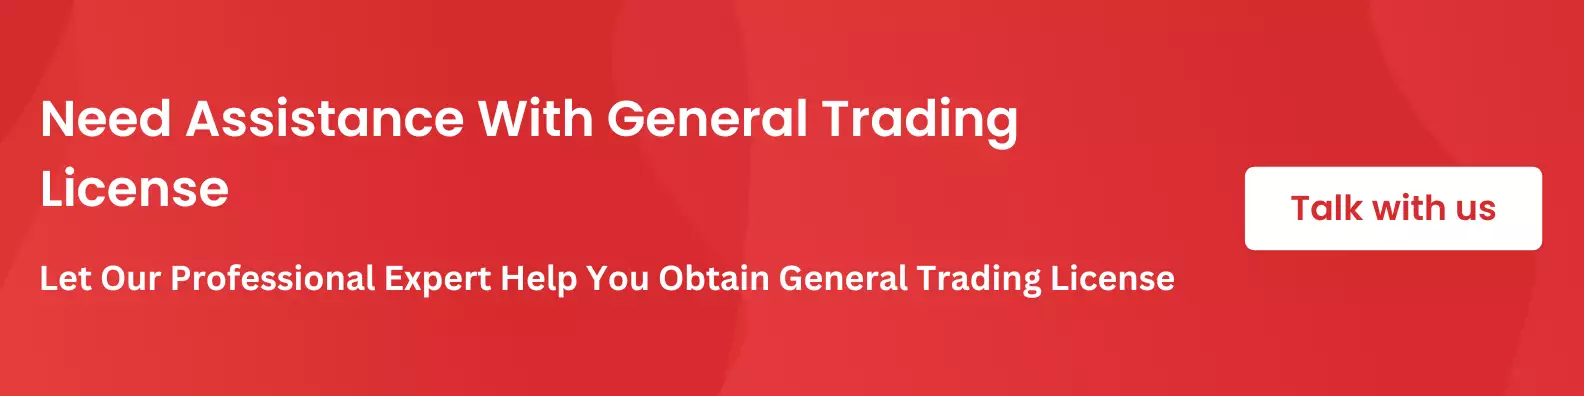 general-trading-license